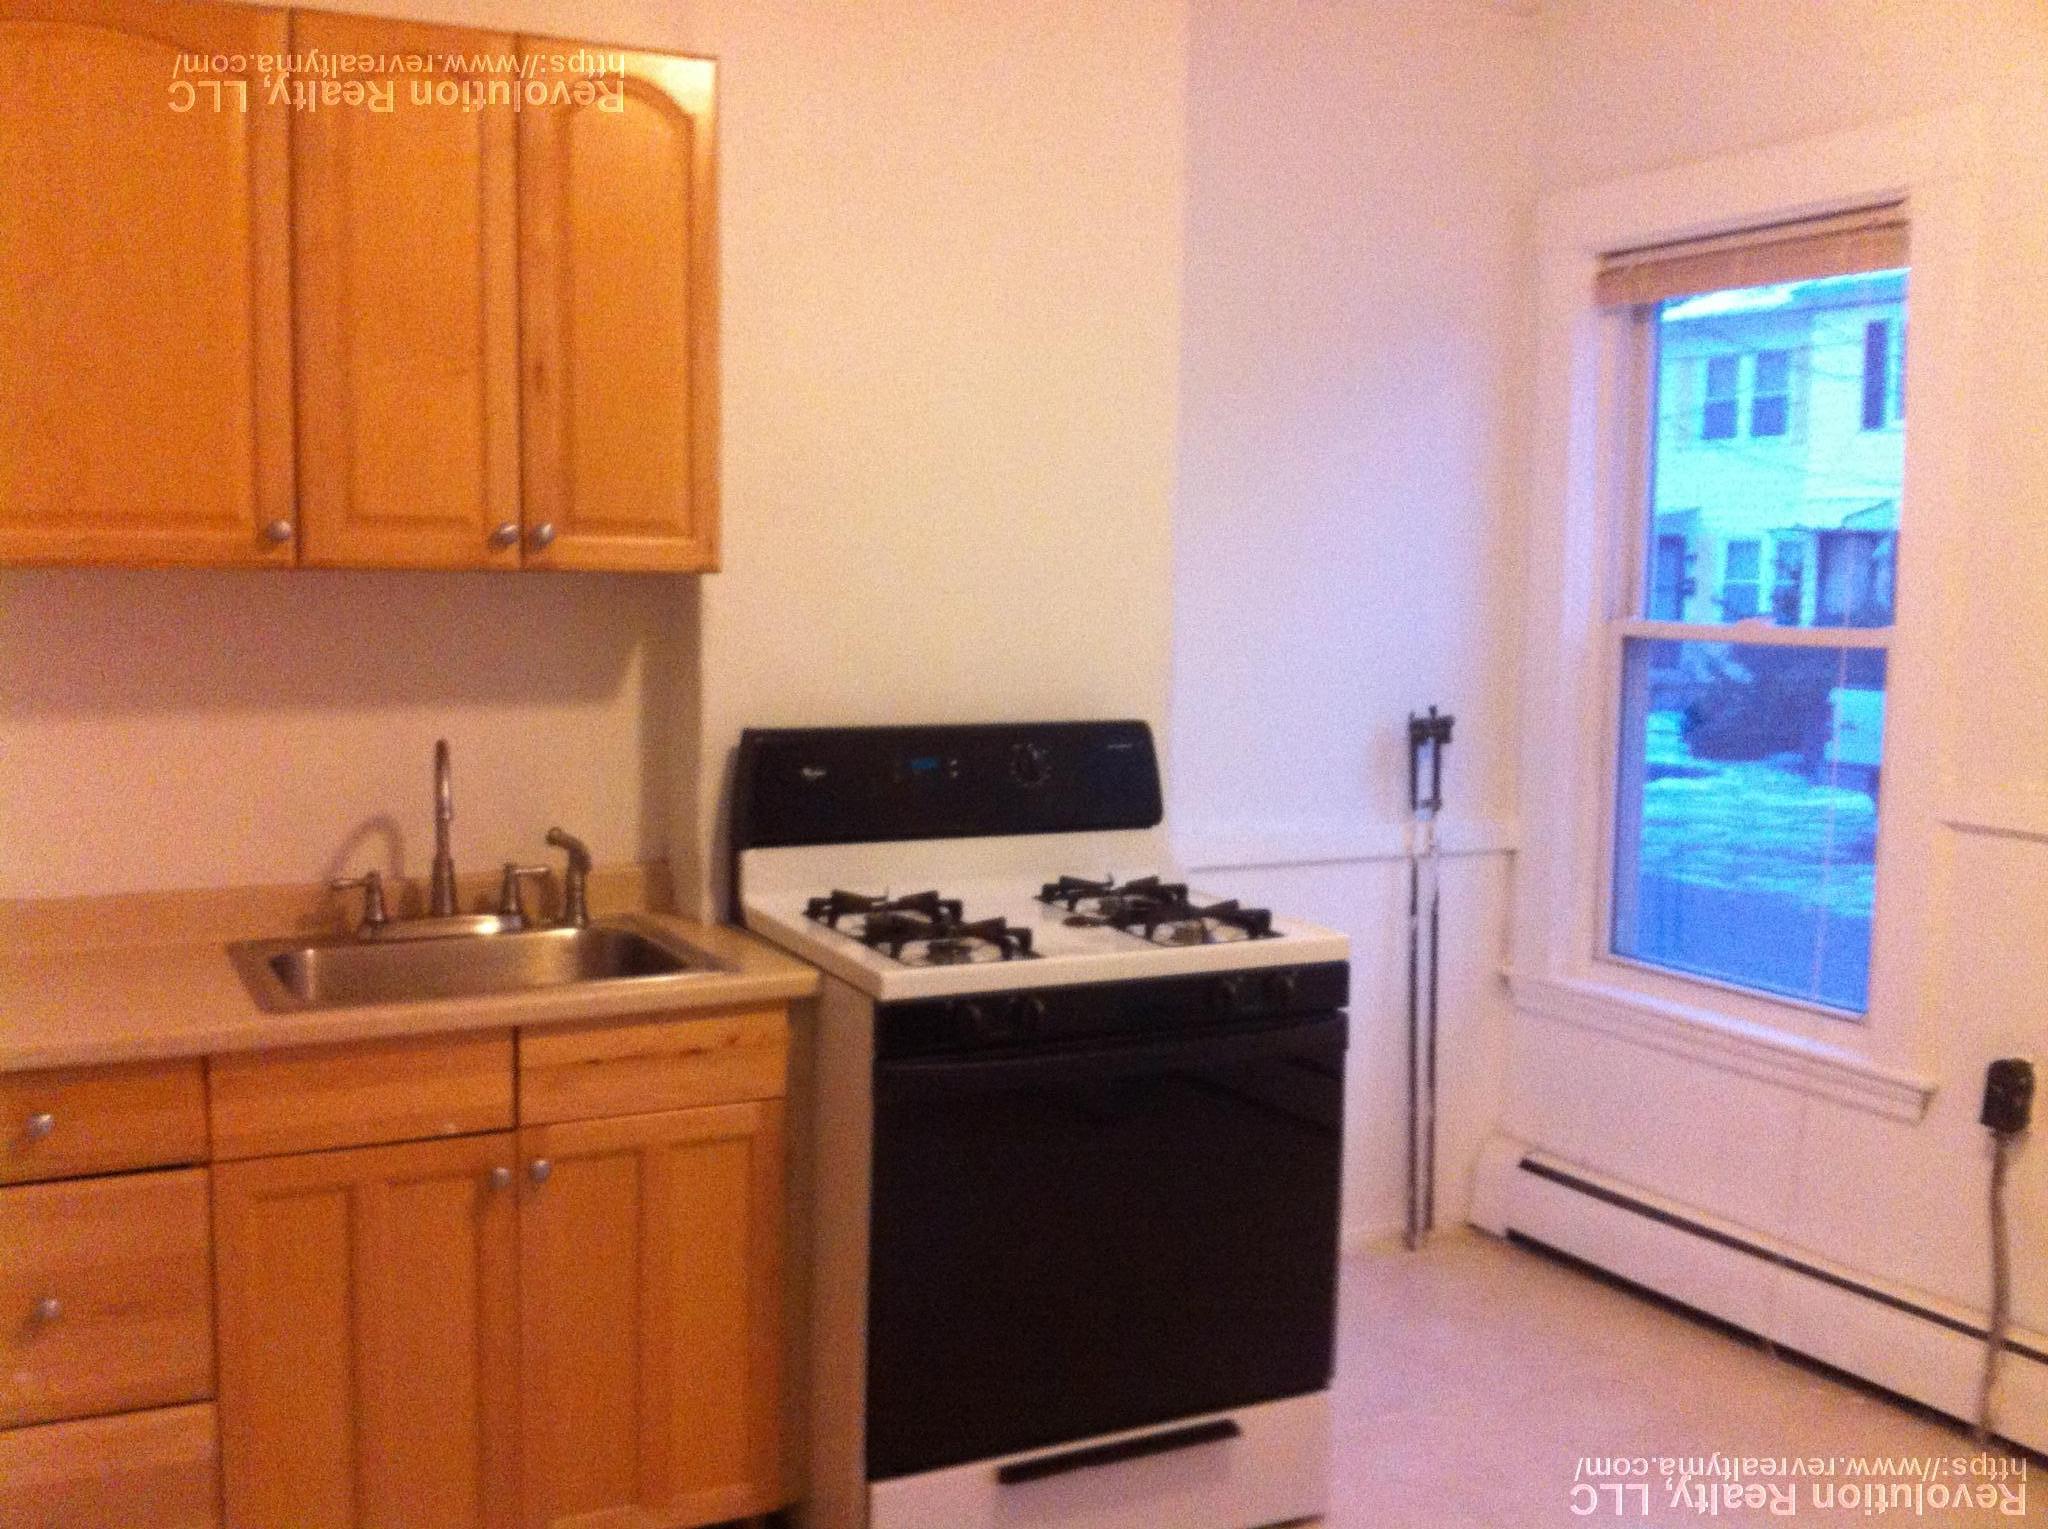 Photos of apartment on Reeds Ct.,Somerville MA 02145